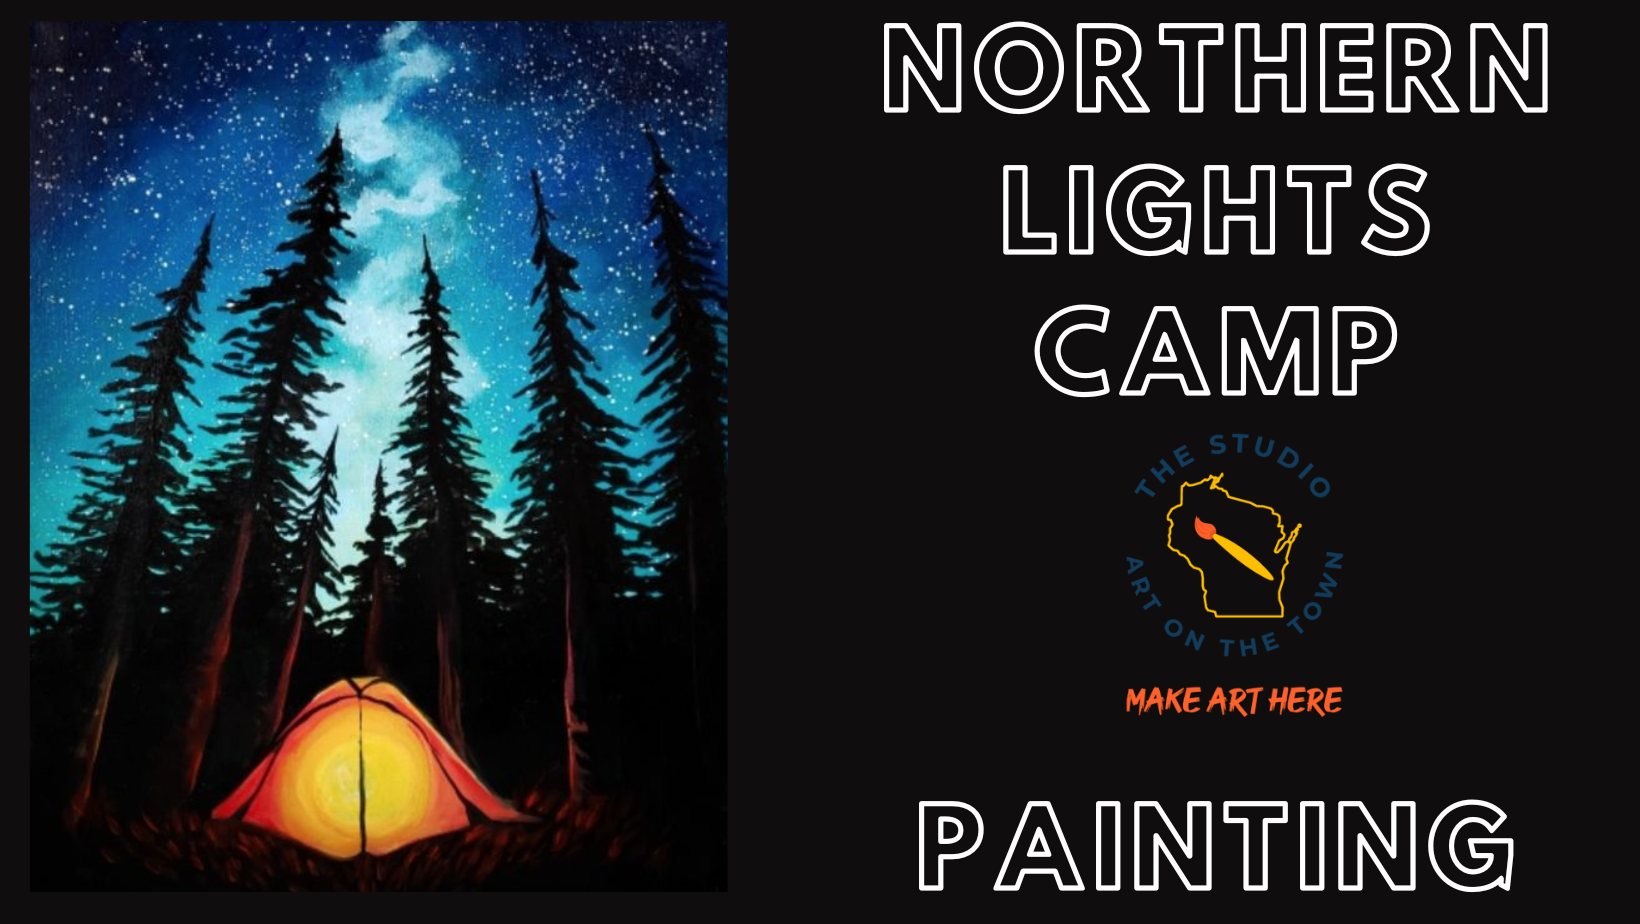 Northern Lights Camp Painting